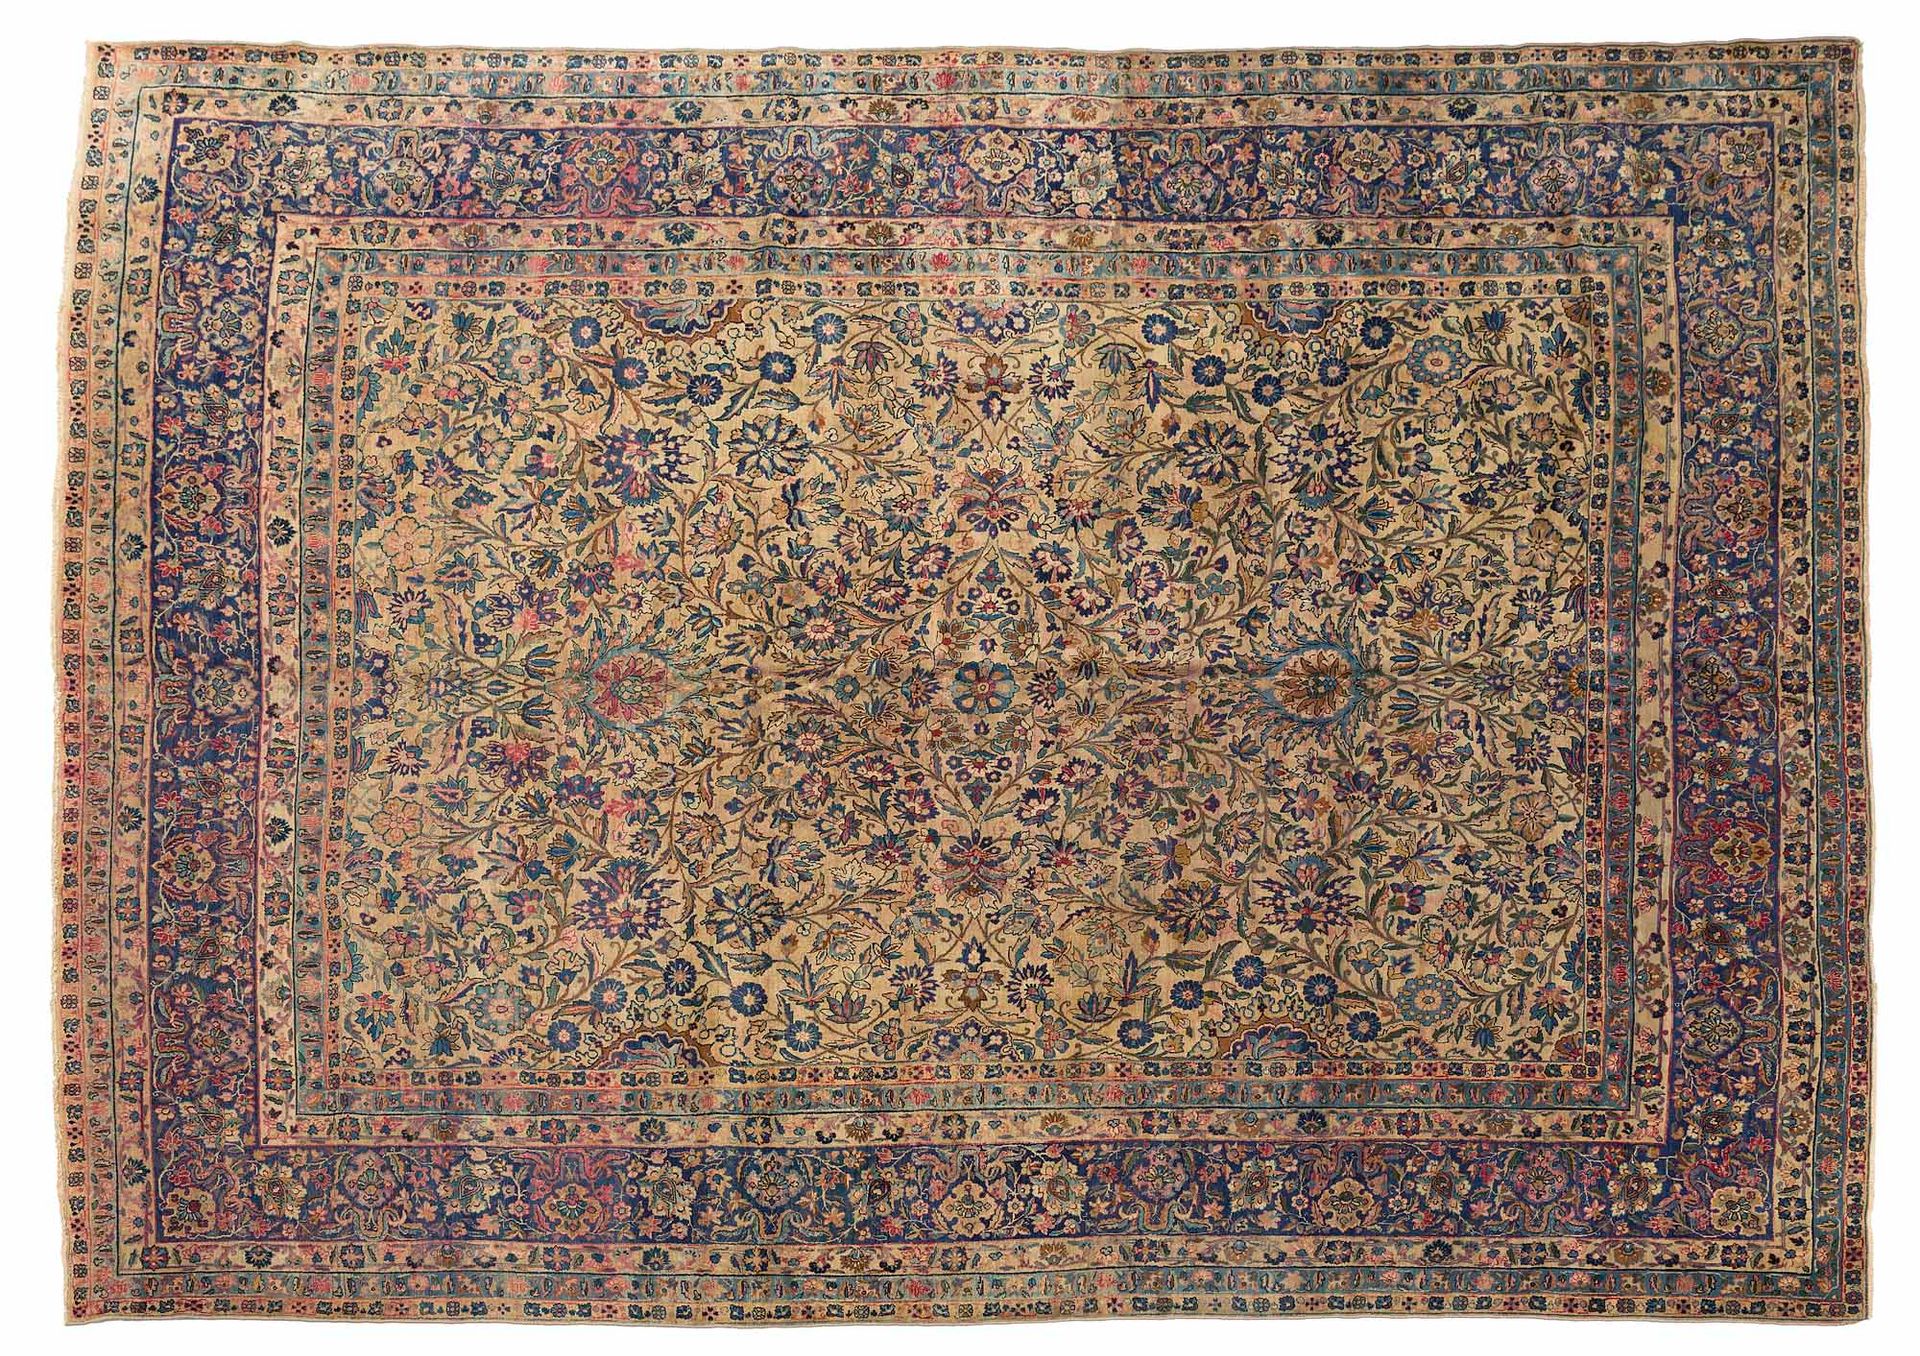 Null Carpet KIRMAN (Persia), 1st third of the 20th century

Dimensions : 360 x 2&hellip;